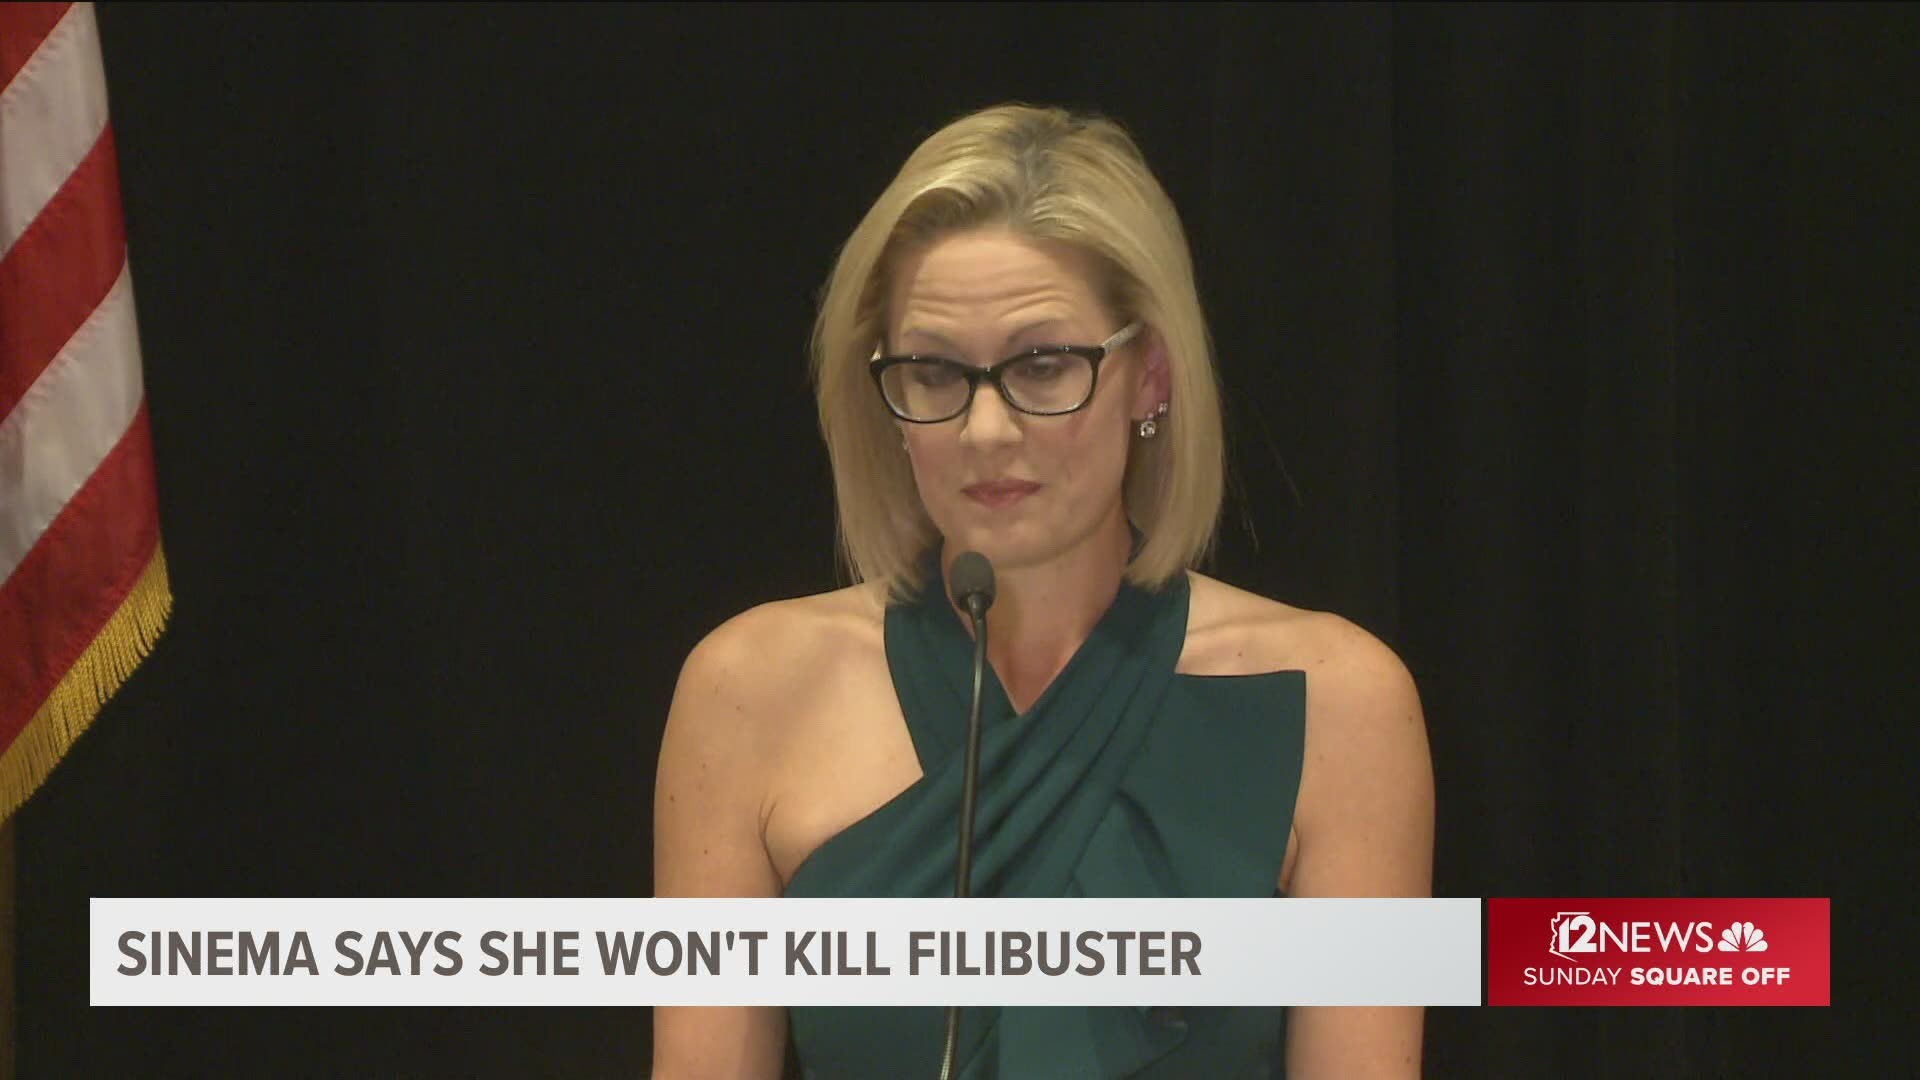 Democratic Sen. Kyrsten Sinema showed her clout in the new U.S. Senate session by sticking to her opposition to ending the filibuster.